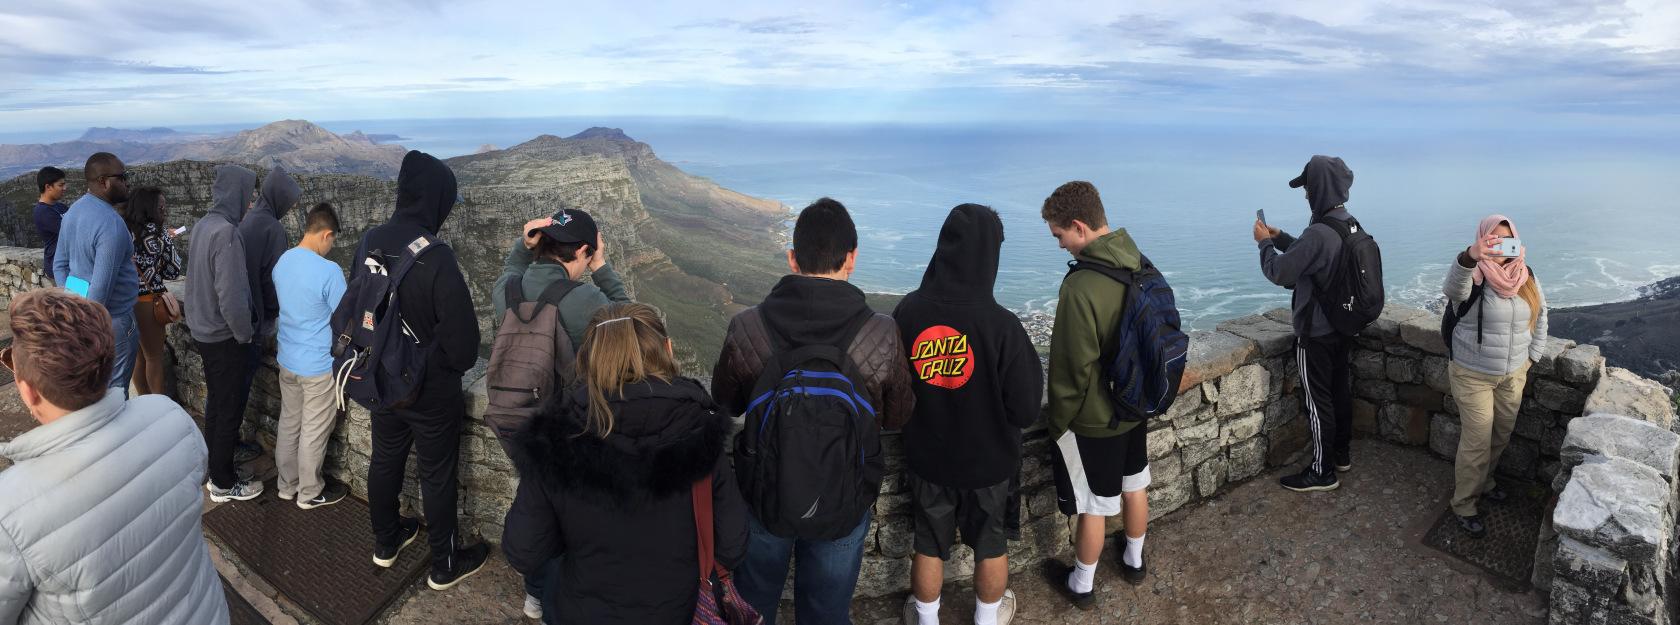 South Africa Immersion 2018